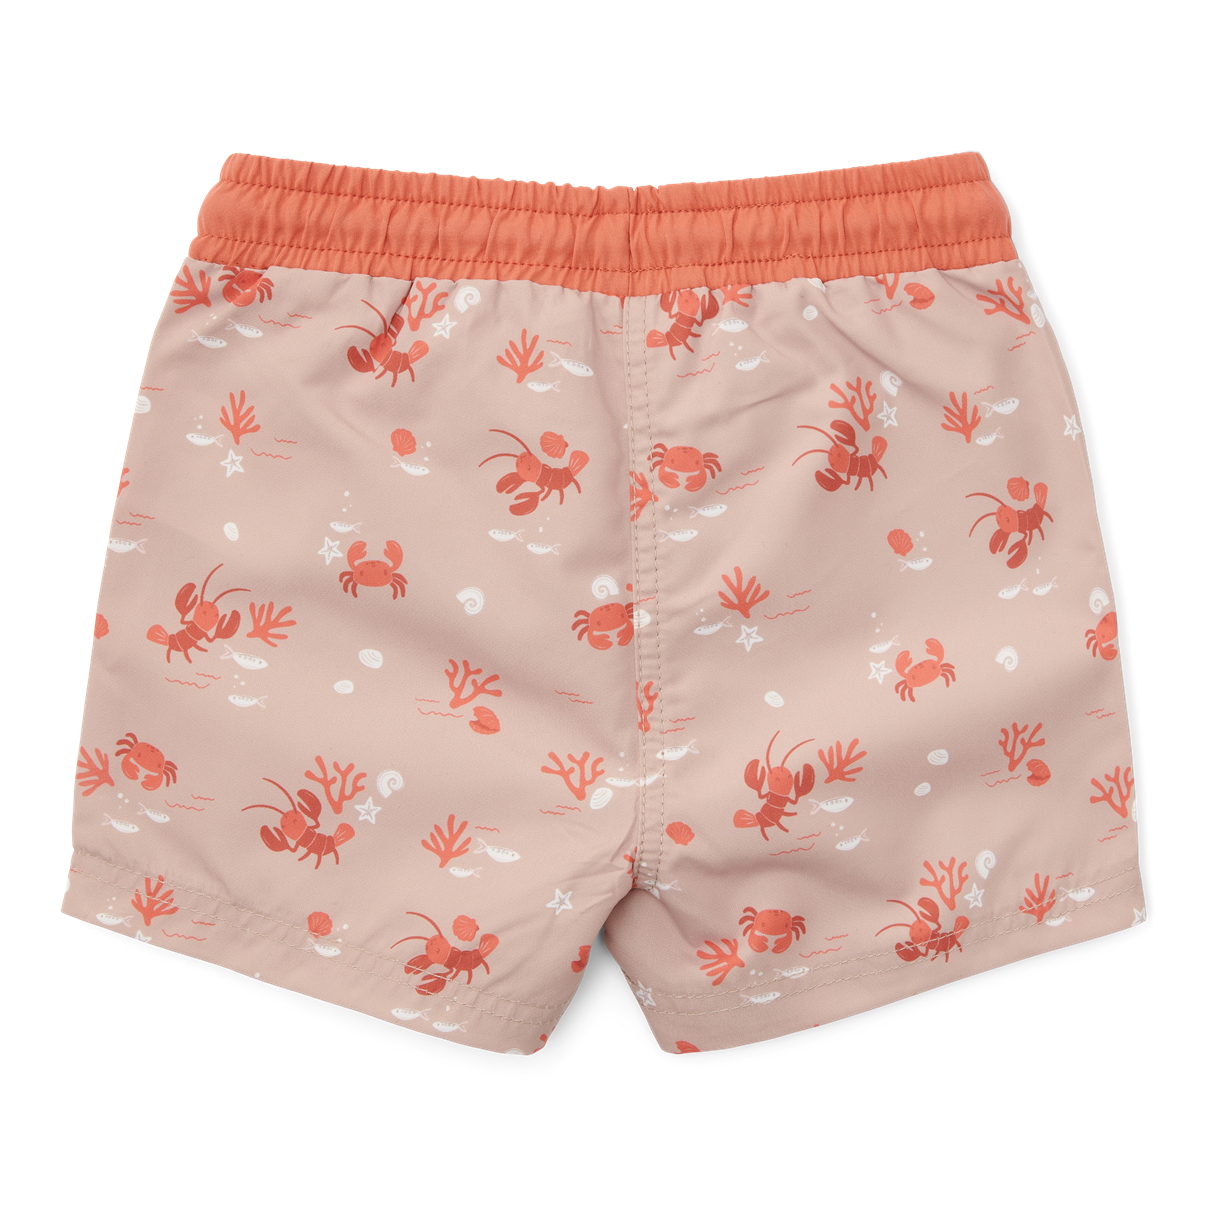 CL24048102 – CL24048103 – CL24048104 – CL24048105 – product – Swimshort – Lobster Bay (2)